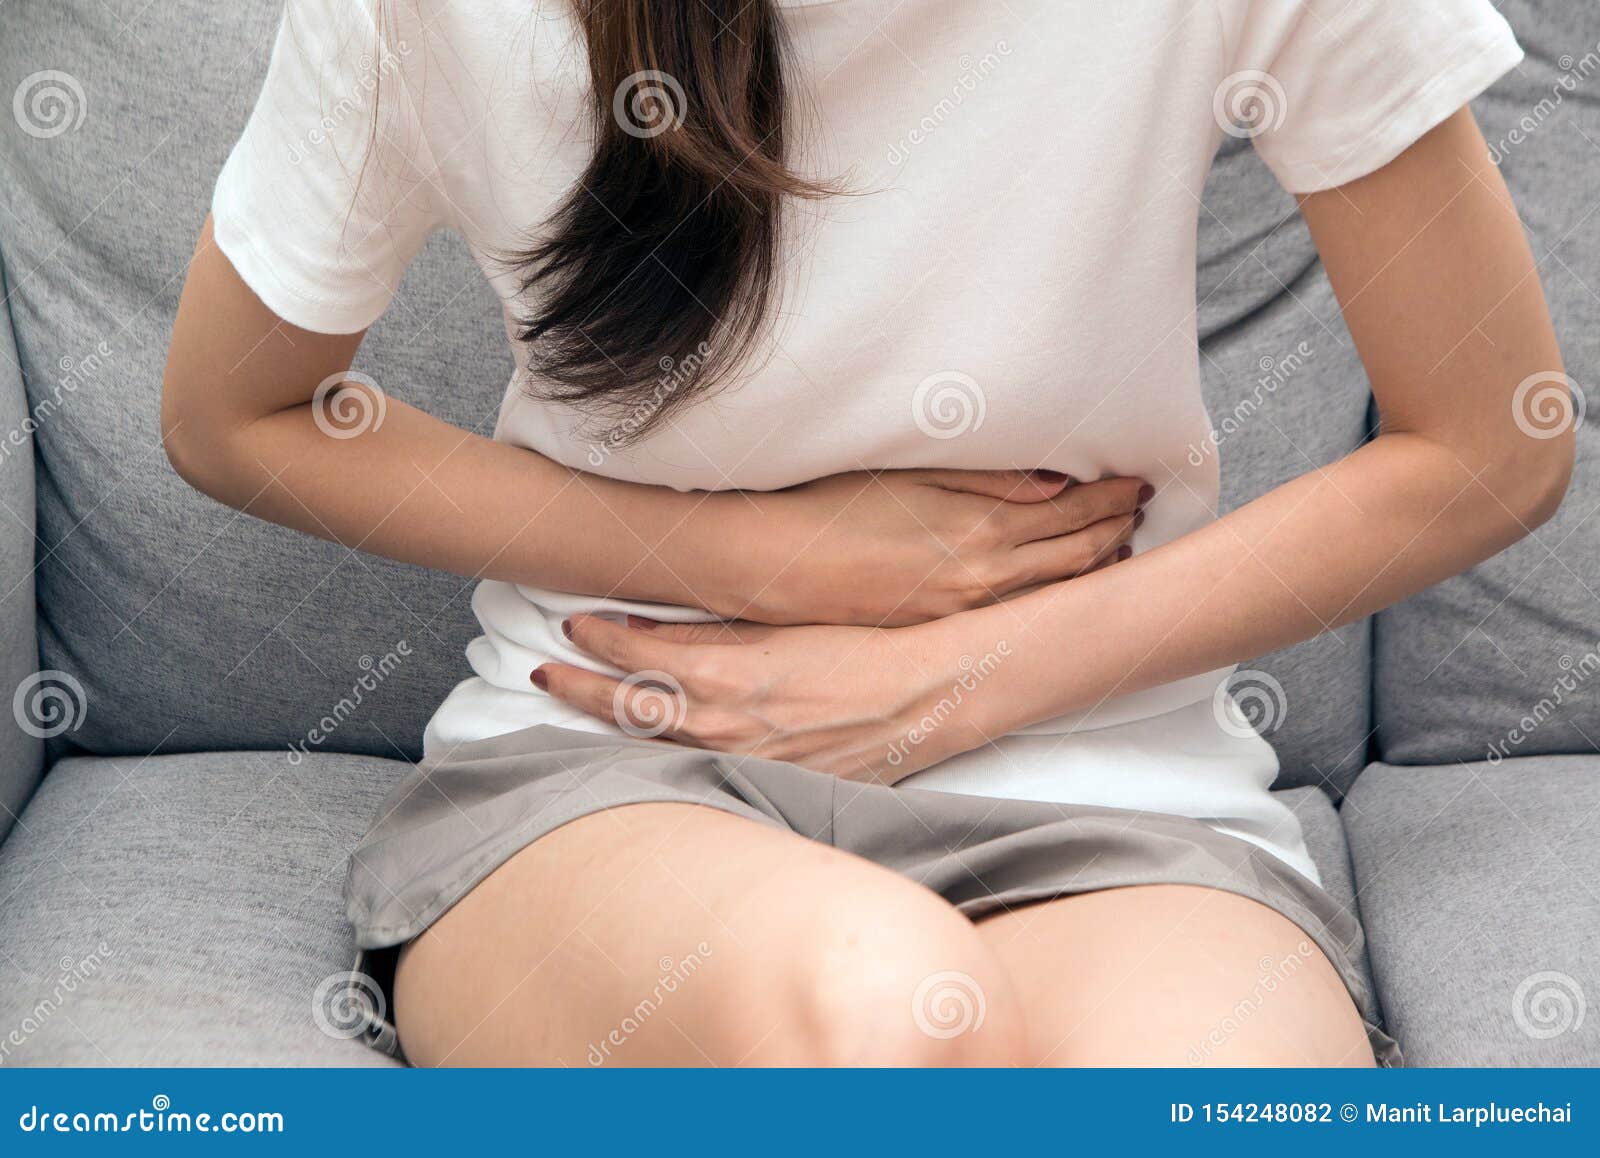 asian woman holds her stomach with both hands. stomach upset or pain during menstruation.